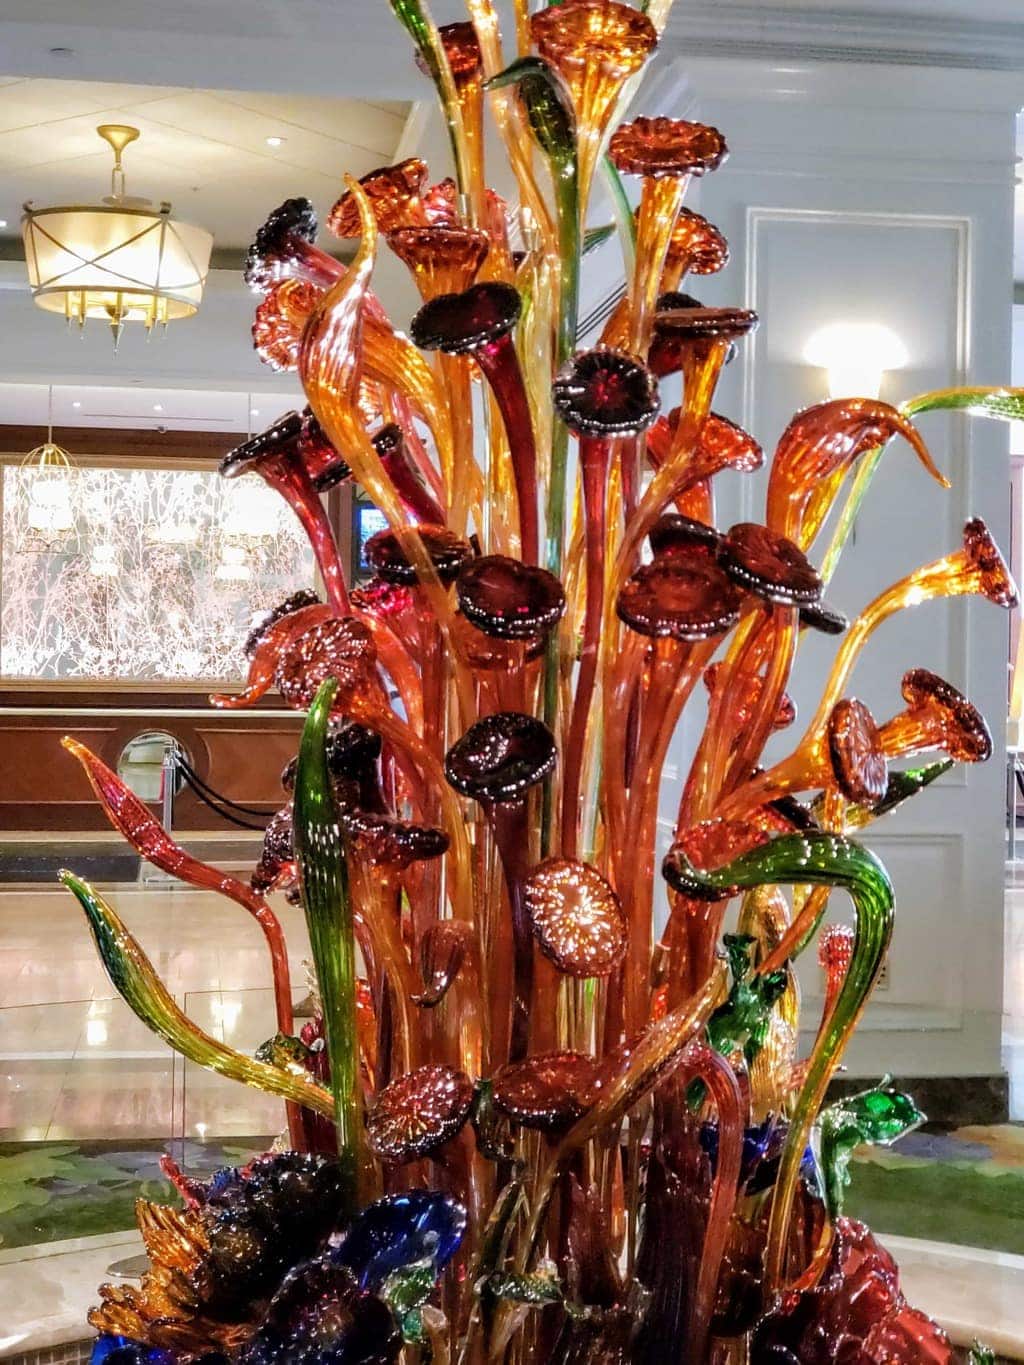 Dale-Chihuly-floral-glass-sculpture-gaylord-opryland